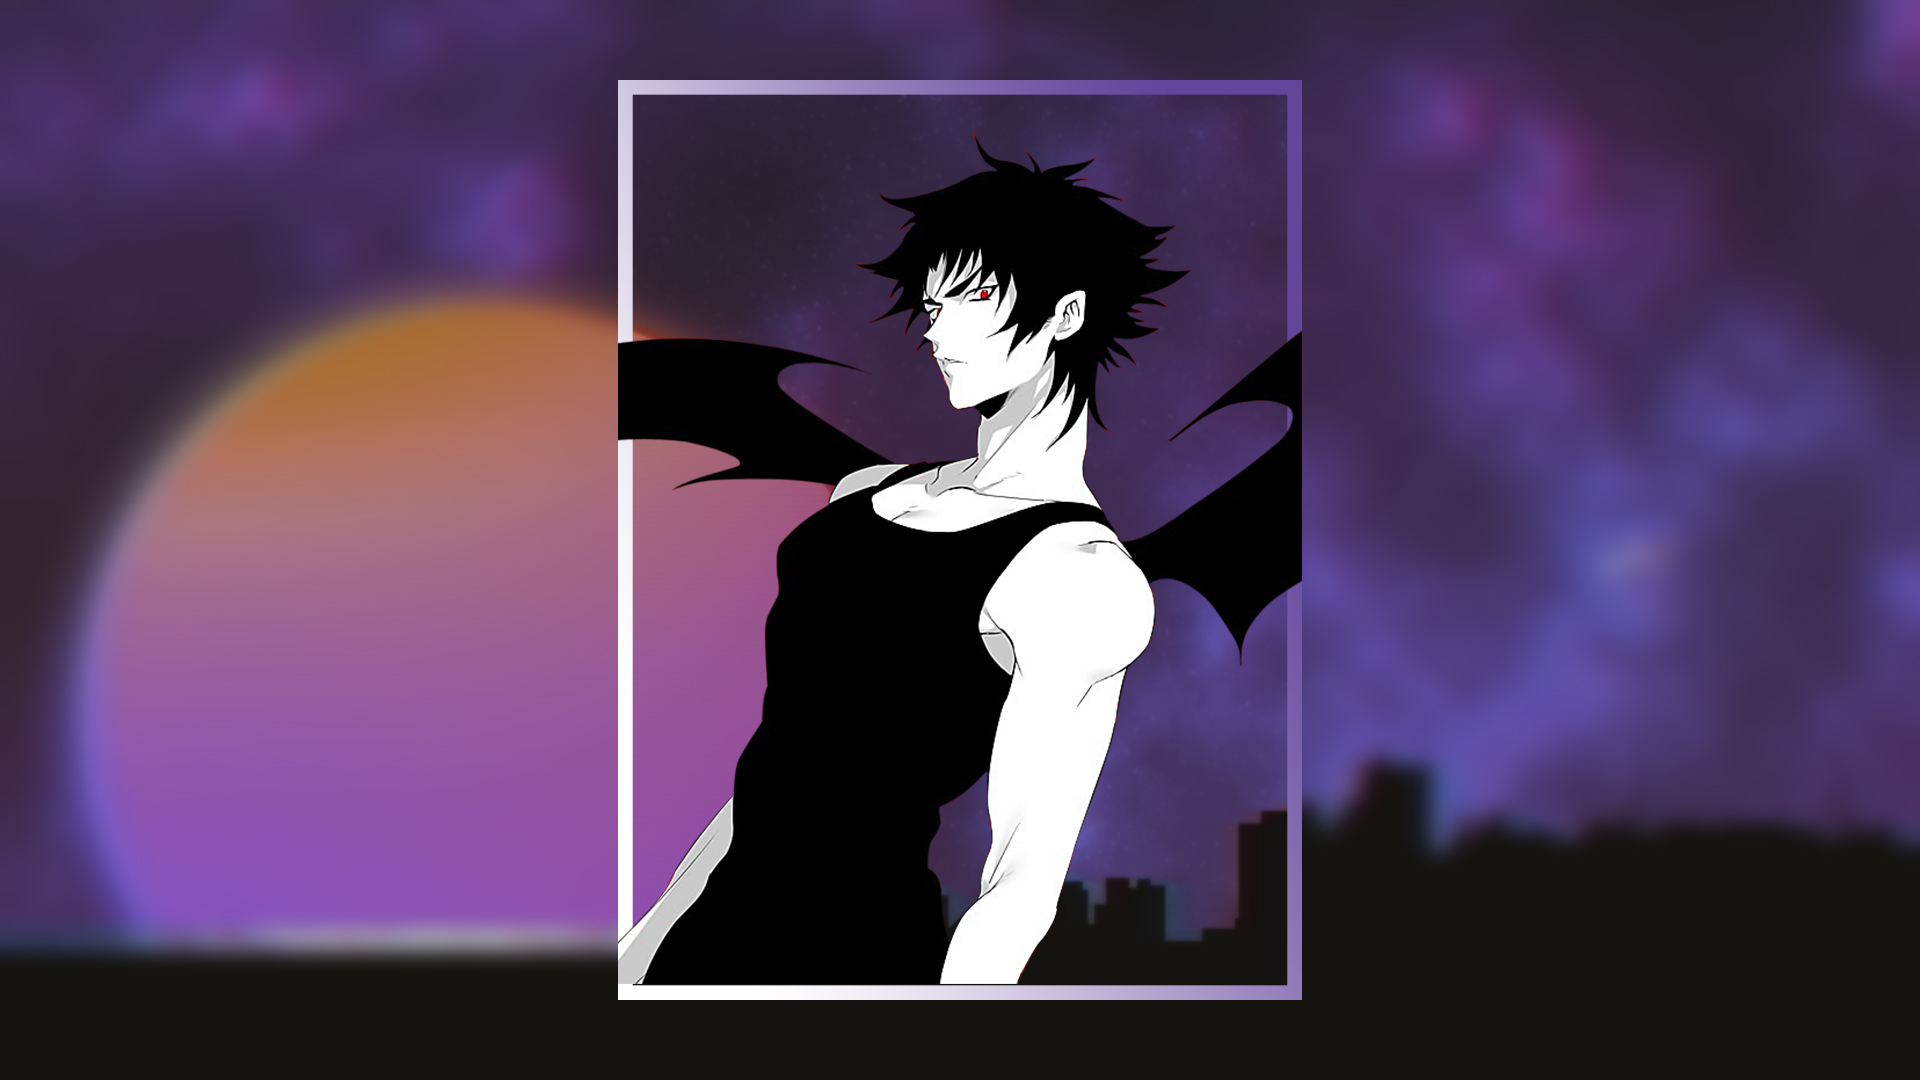 Picture In Picture Devilman Crybaby Vaporwave 1920x1080